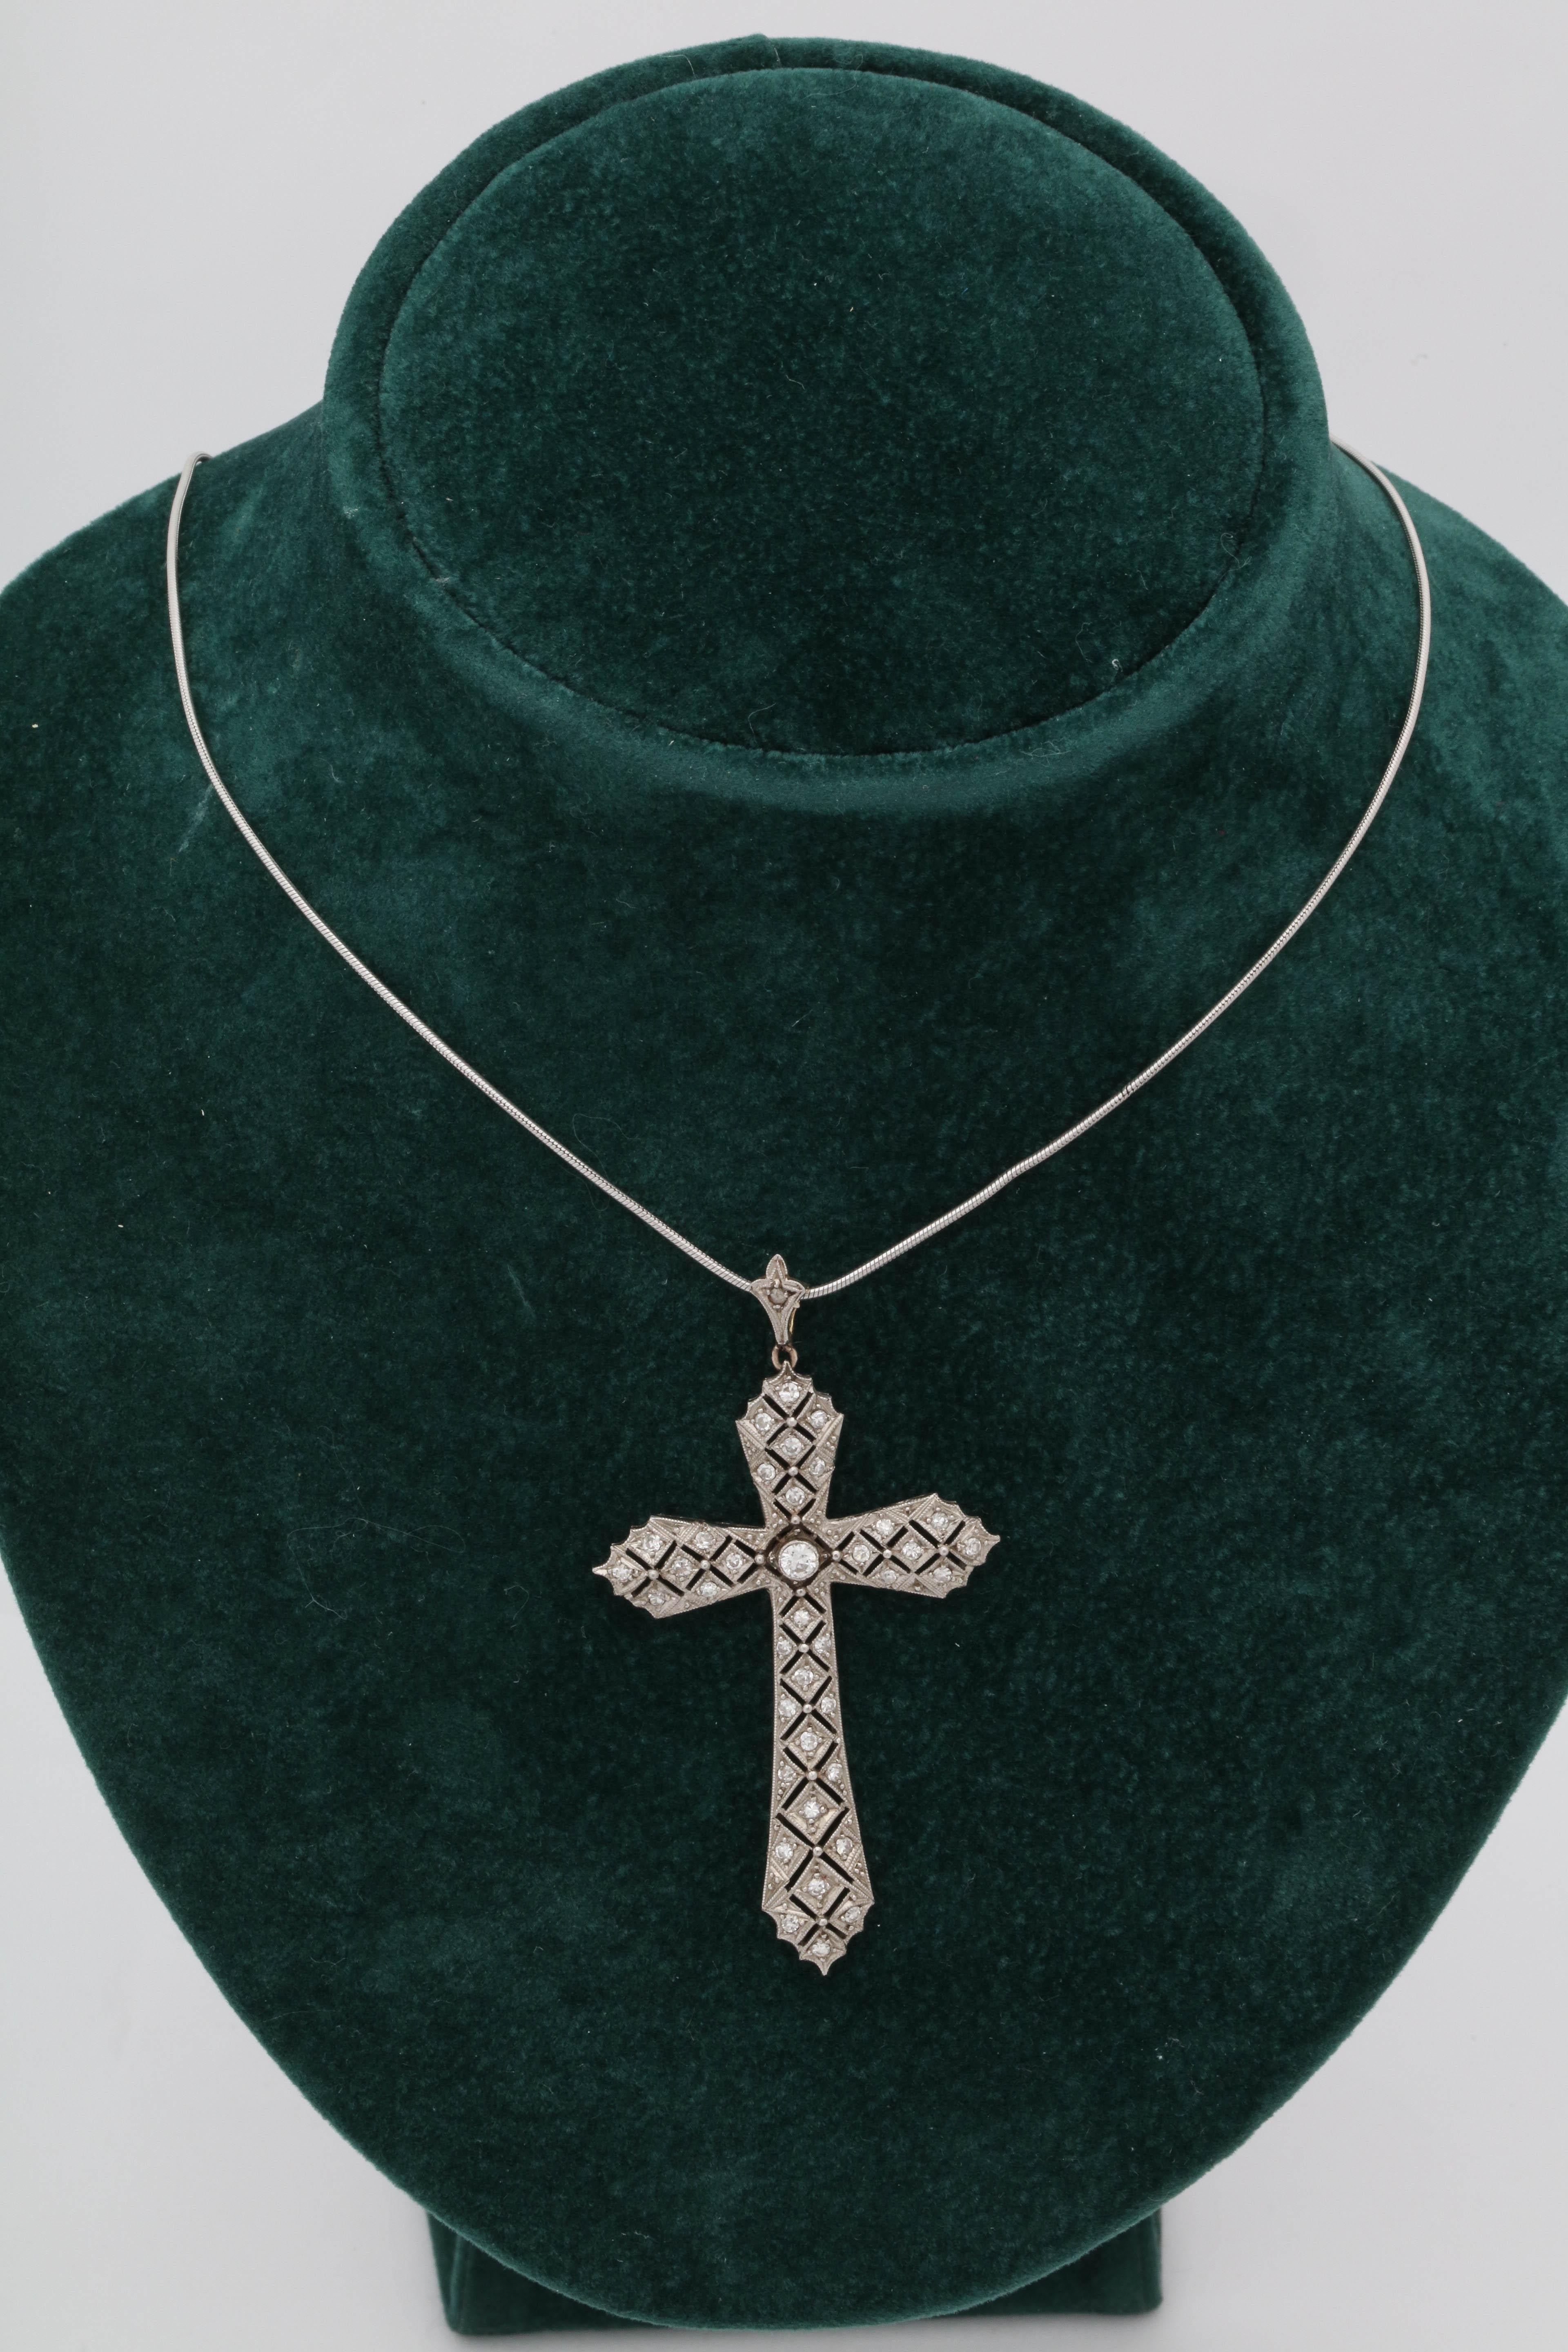 One Ladies Antique Art Deco Open Pierced Workmanship Diamond Cross Pendant Handmade In The United States Of America. Handmade Platinum And 18kt Gold Bail With Diamonds Attached To Top Of Cross. Created in the 1920's.Aproximate Diamond Weight 1.5 Cts.